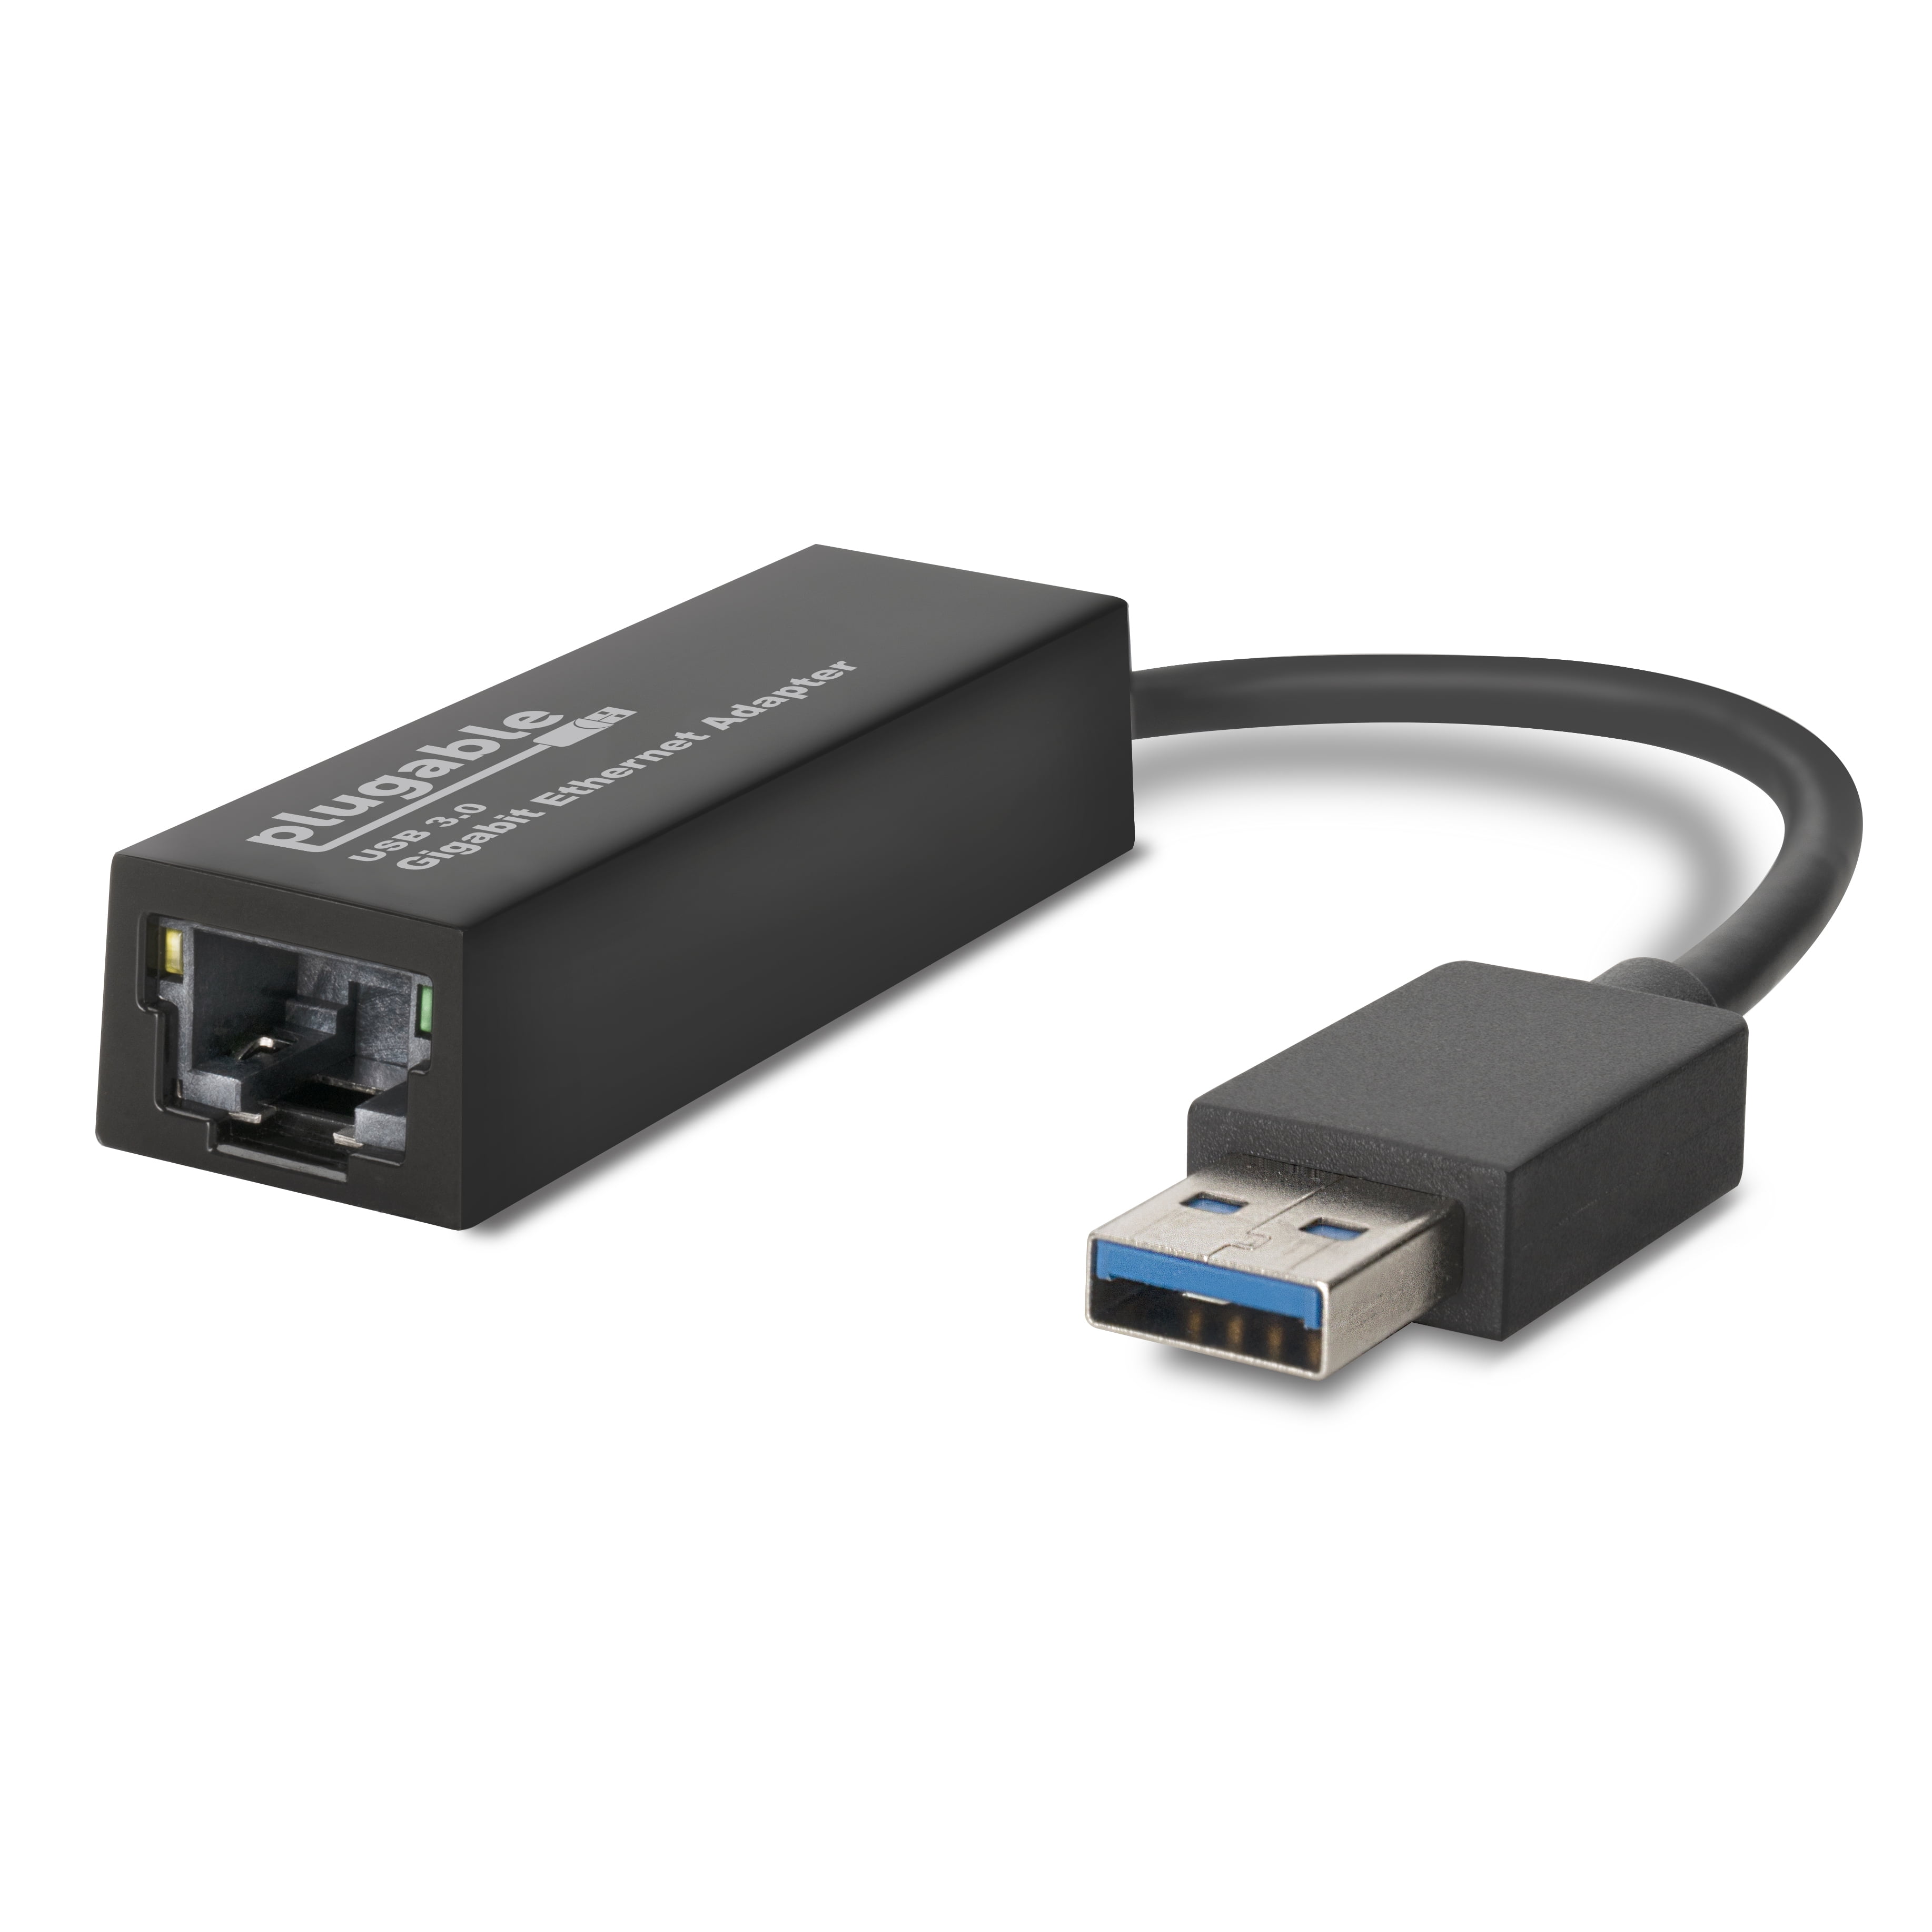 Plugable USB to Adapter, 3.0 to Gigabit Ethernet, Supports 11, 8.1, 7, XP, Linux, Chrome OS - Walmart.com